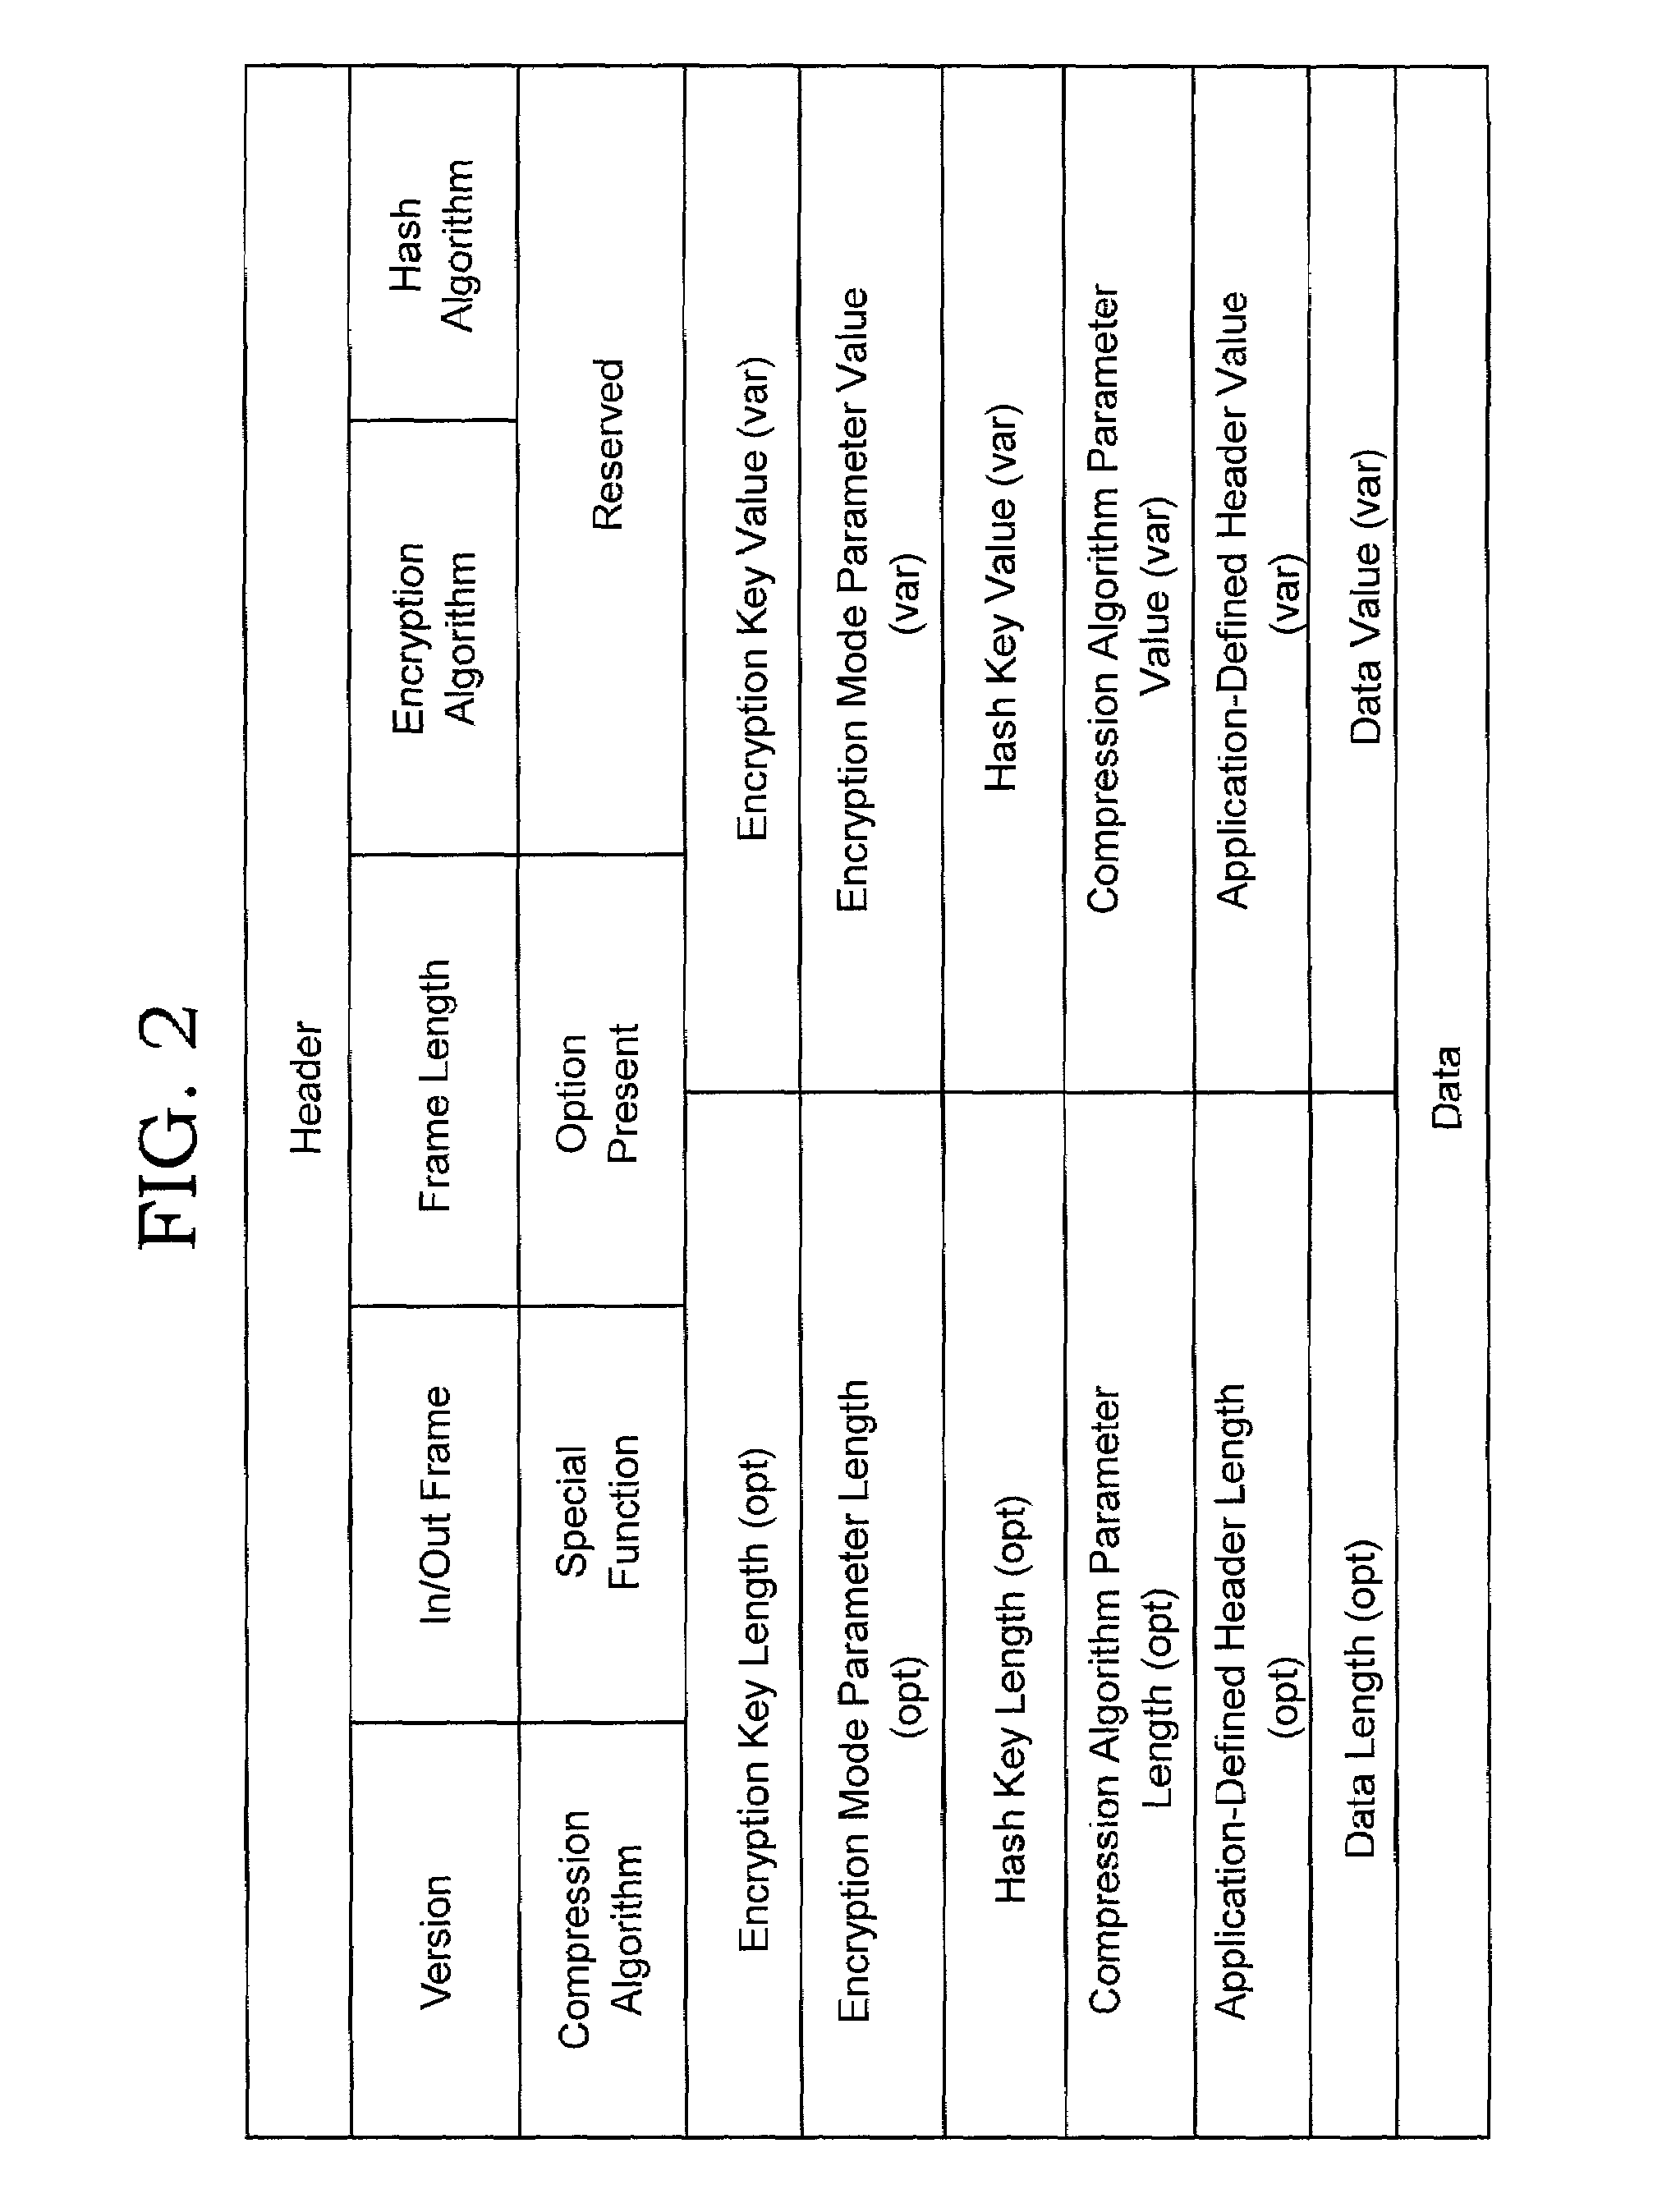 Stateless message processing scheme for network processors interactions